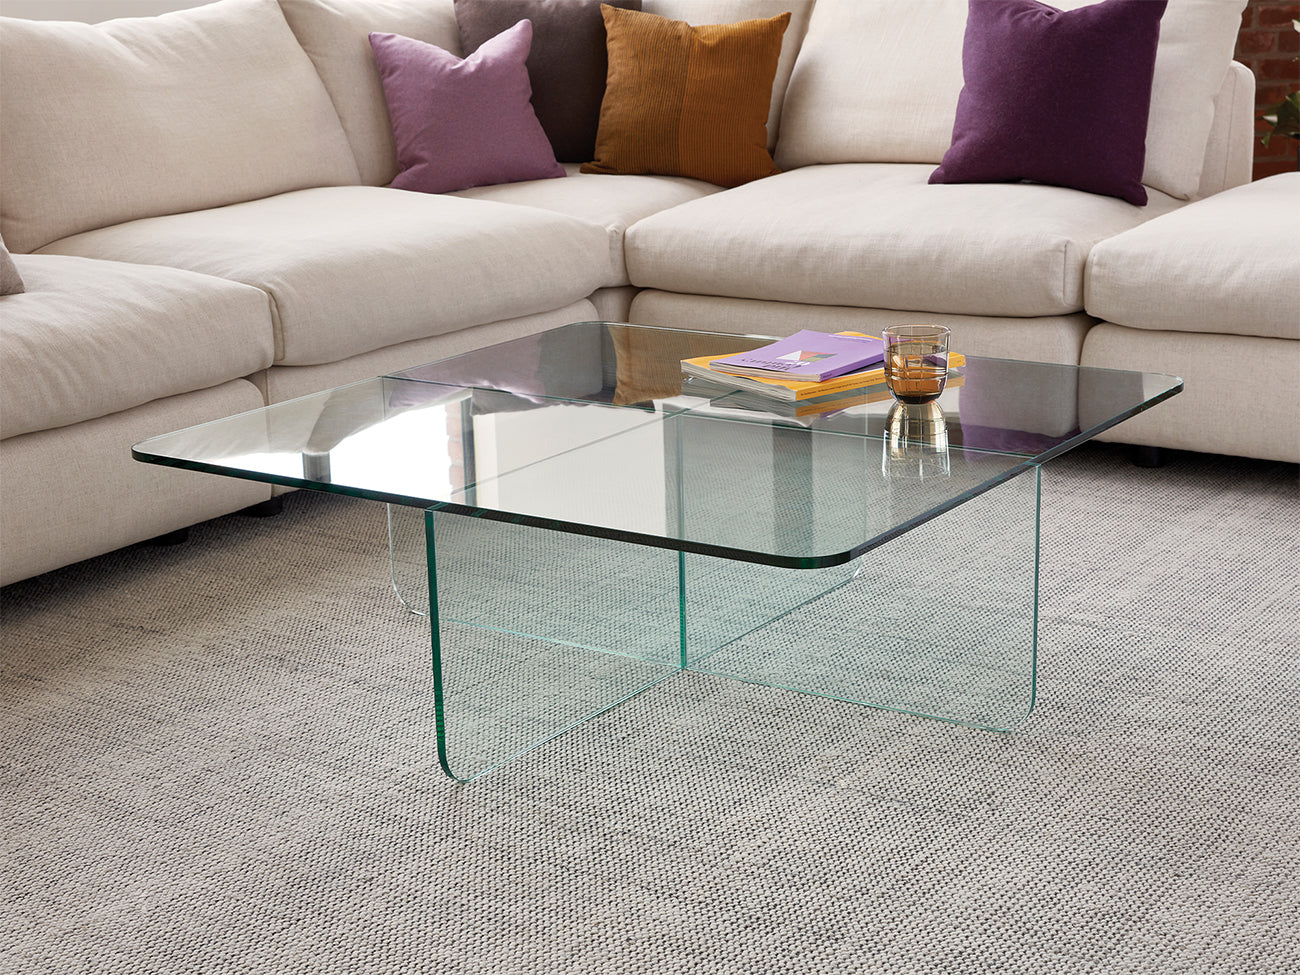 Verre Coffee Table - In Stock